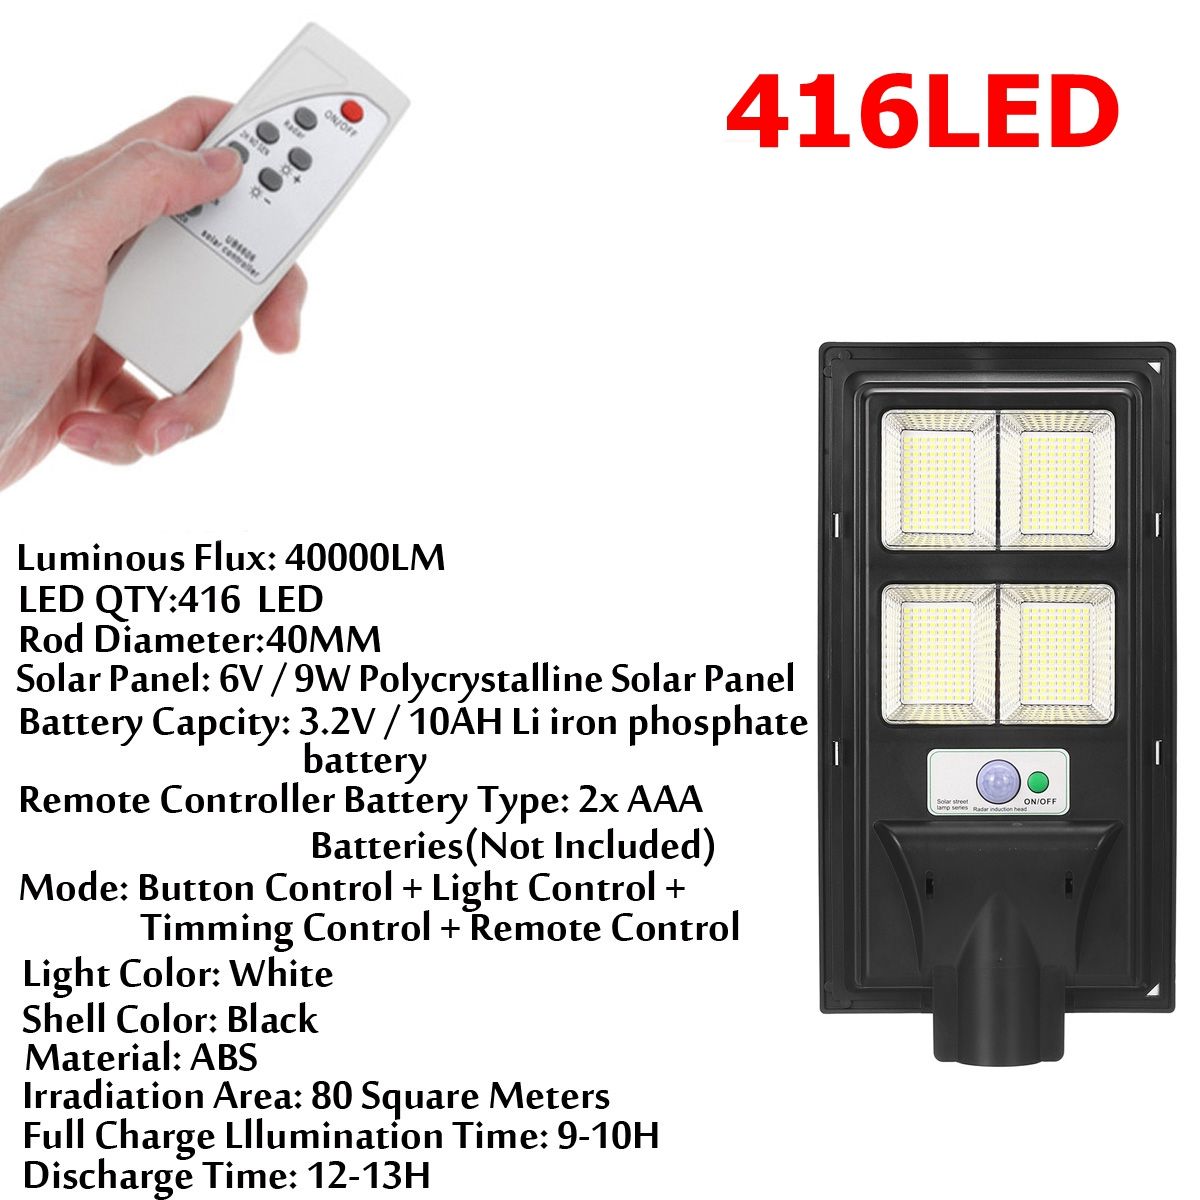 208416624832LED-Solar-Powered-Wall-Street-Light-PIR-Motion-Sensor-Dimmable-Lamp--Remote-Control-1740482